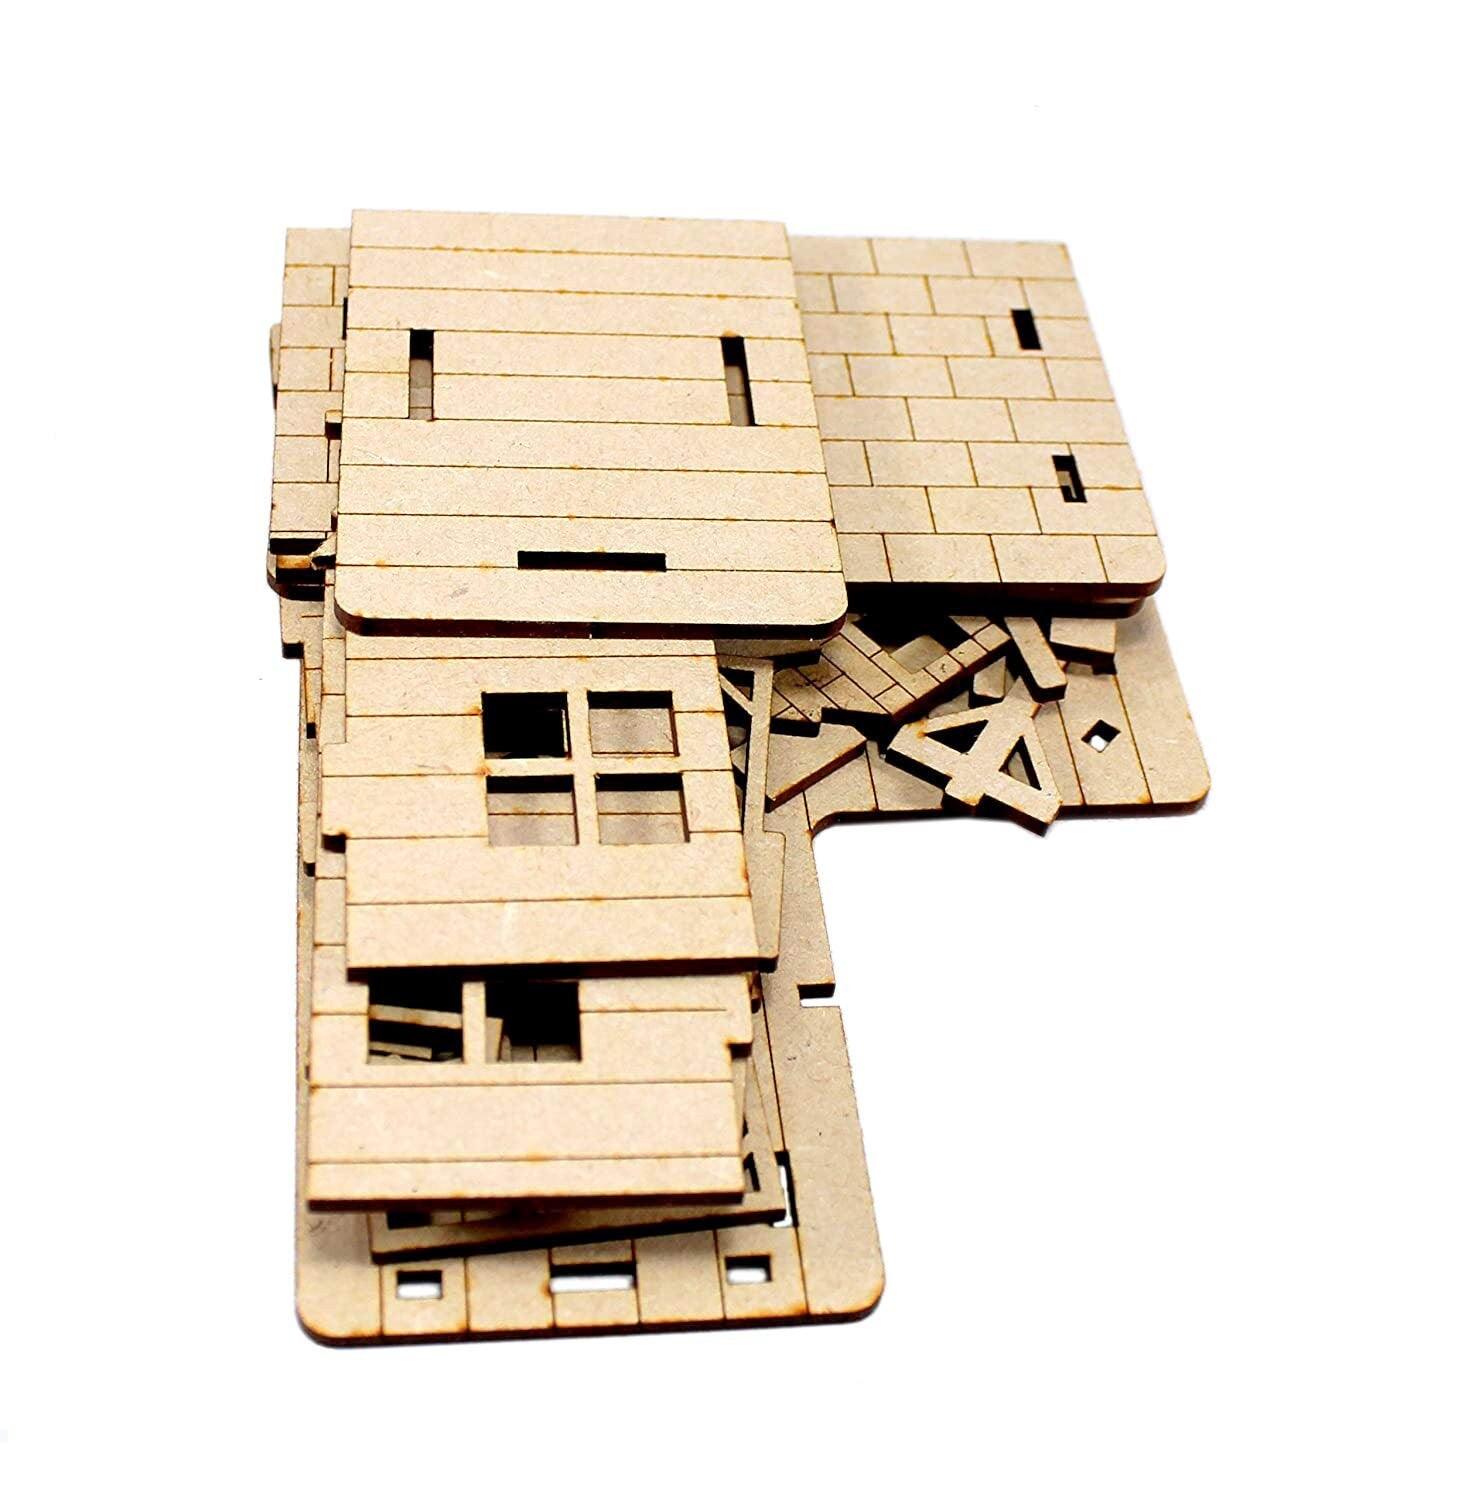 DIY Wooden Doll House Kit - DIY Beach House Miniature - Farm House - 3D Wooden Puzzle - Construction Toy, Modeling Kit - Easy to Assemble - Rajbharti Crafts